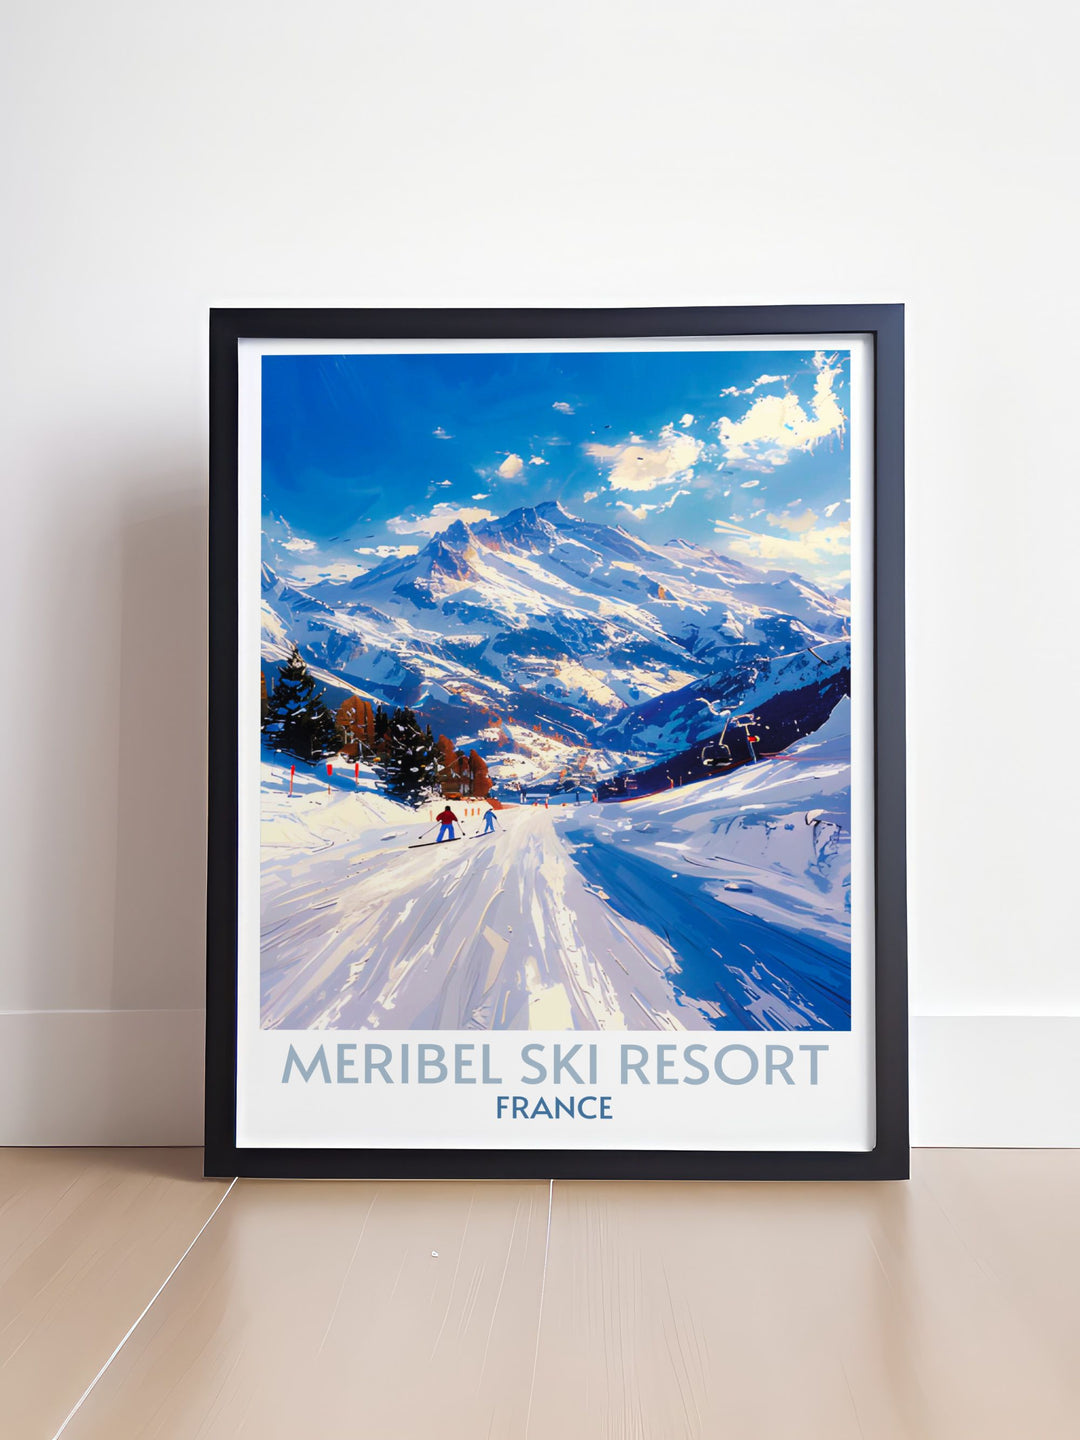 Artistic print of ski slopes in Meribel, showcasing the detailed texture of snow and dynamic skiing action, ideal for enhancing any living space.